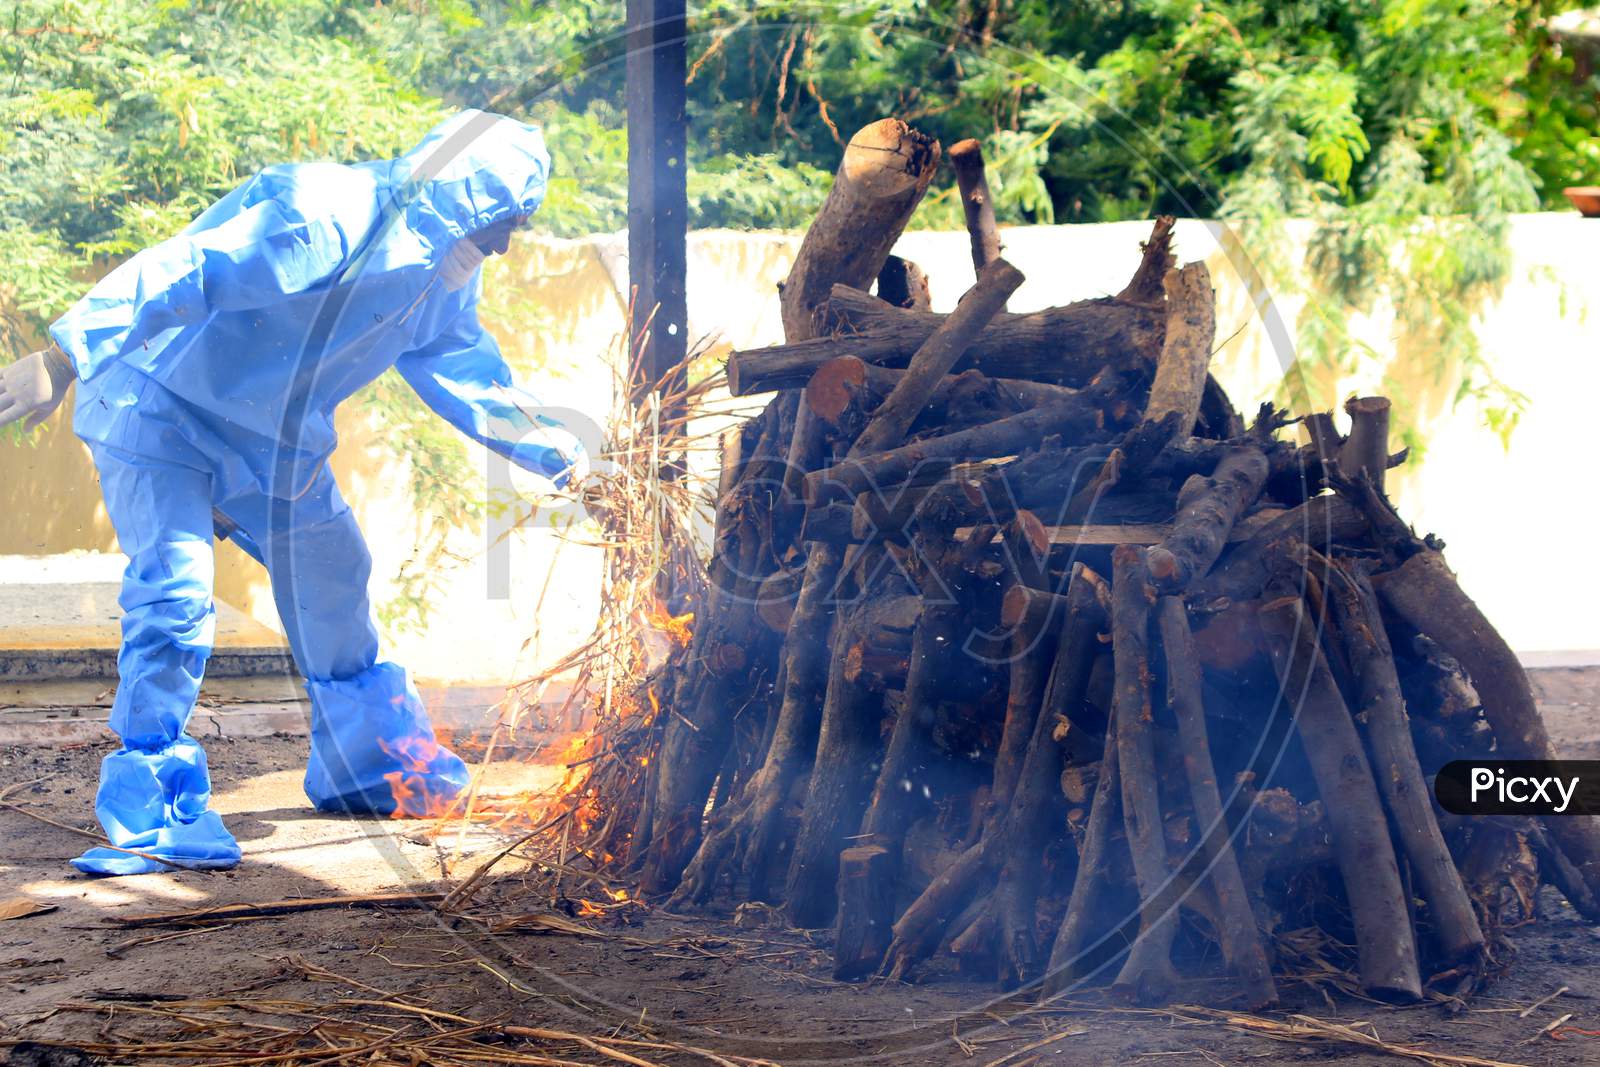 Workers and relatives wearing Personal Protective Equipment (PPE) prepare the cremation for a person who died from the COVID-19 coronavirus, In Ajmer On August 6 2020.